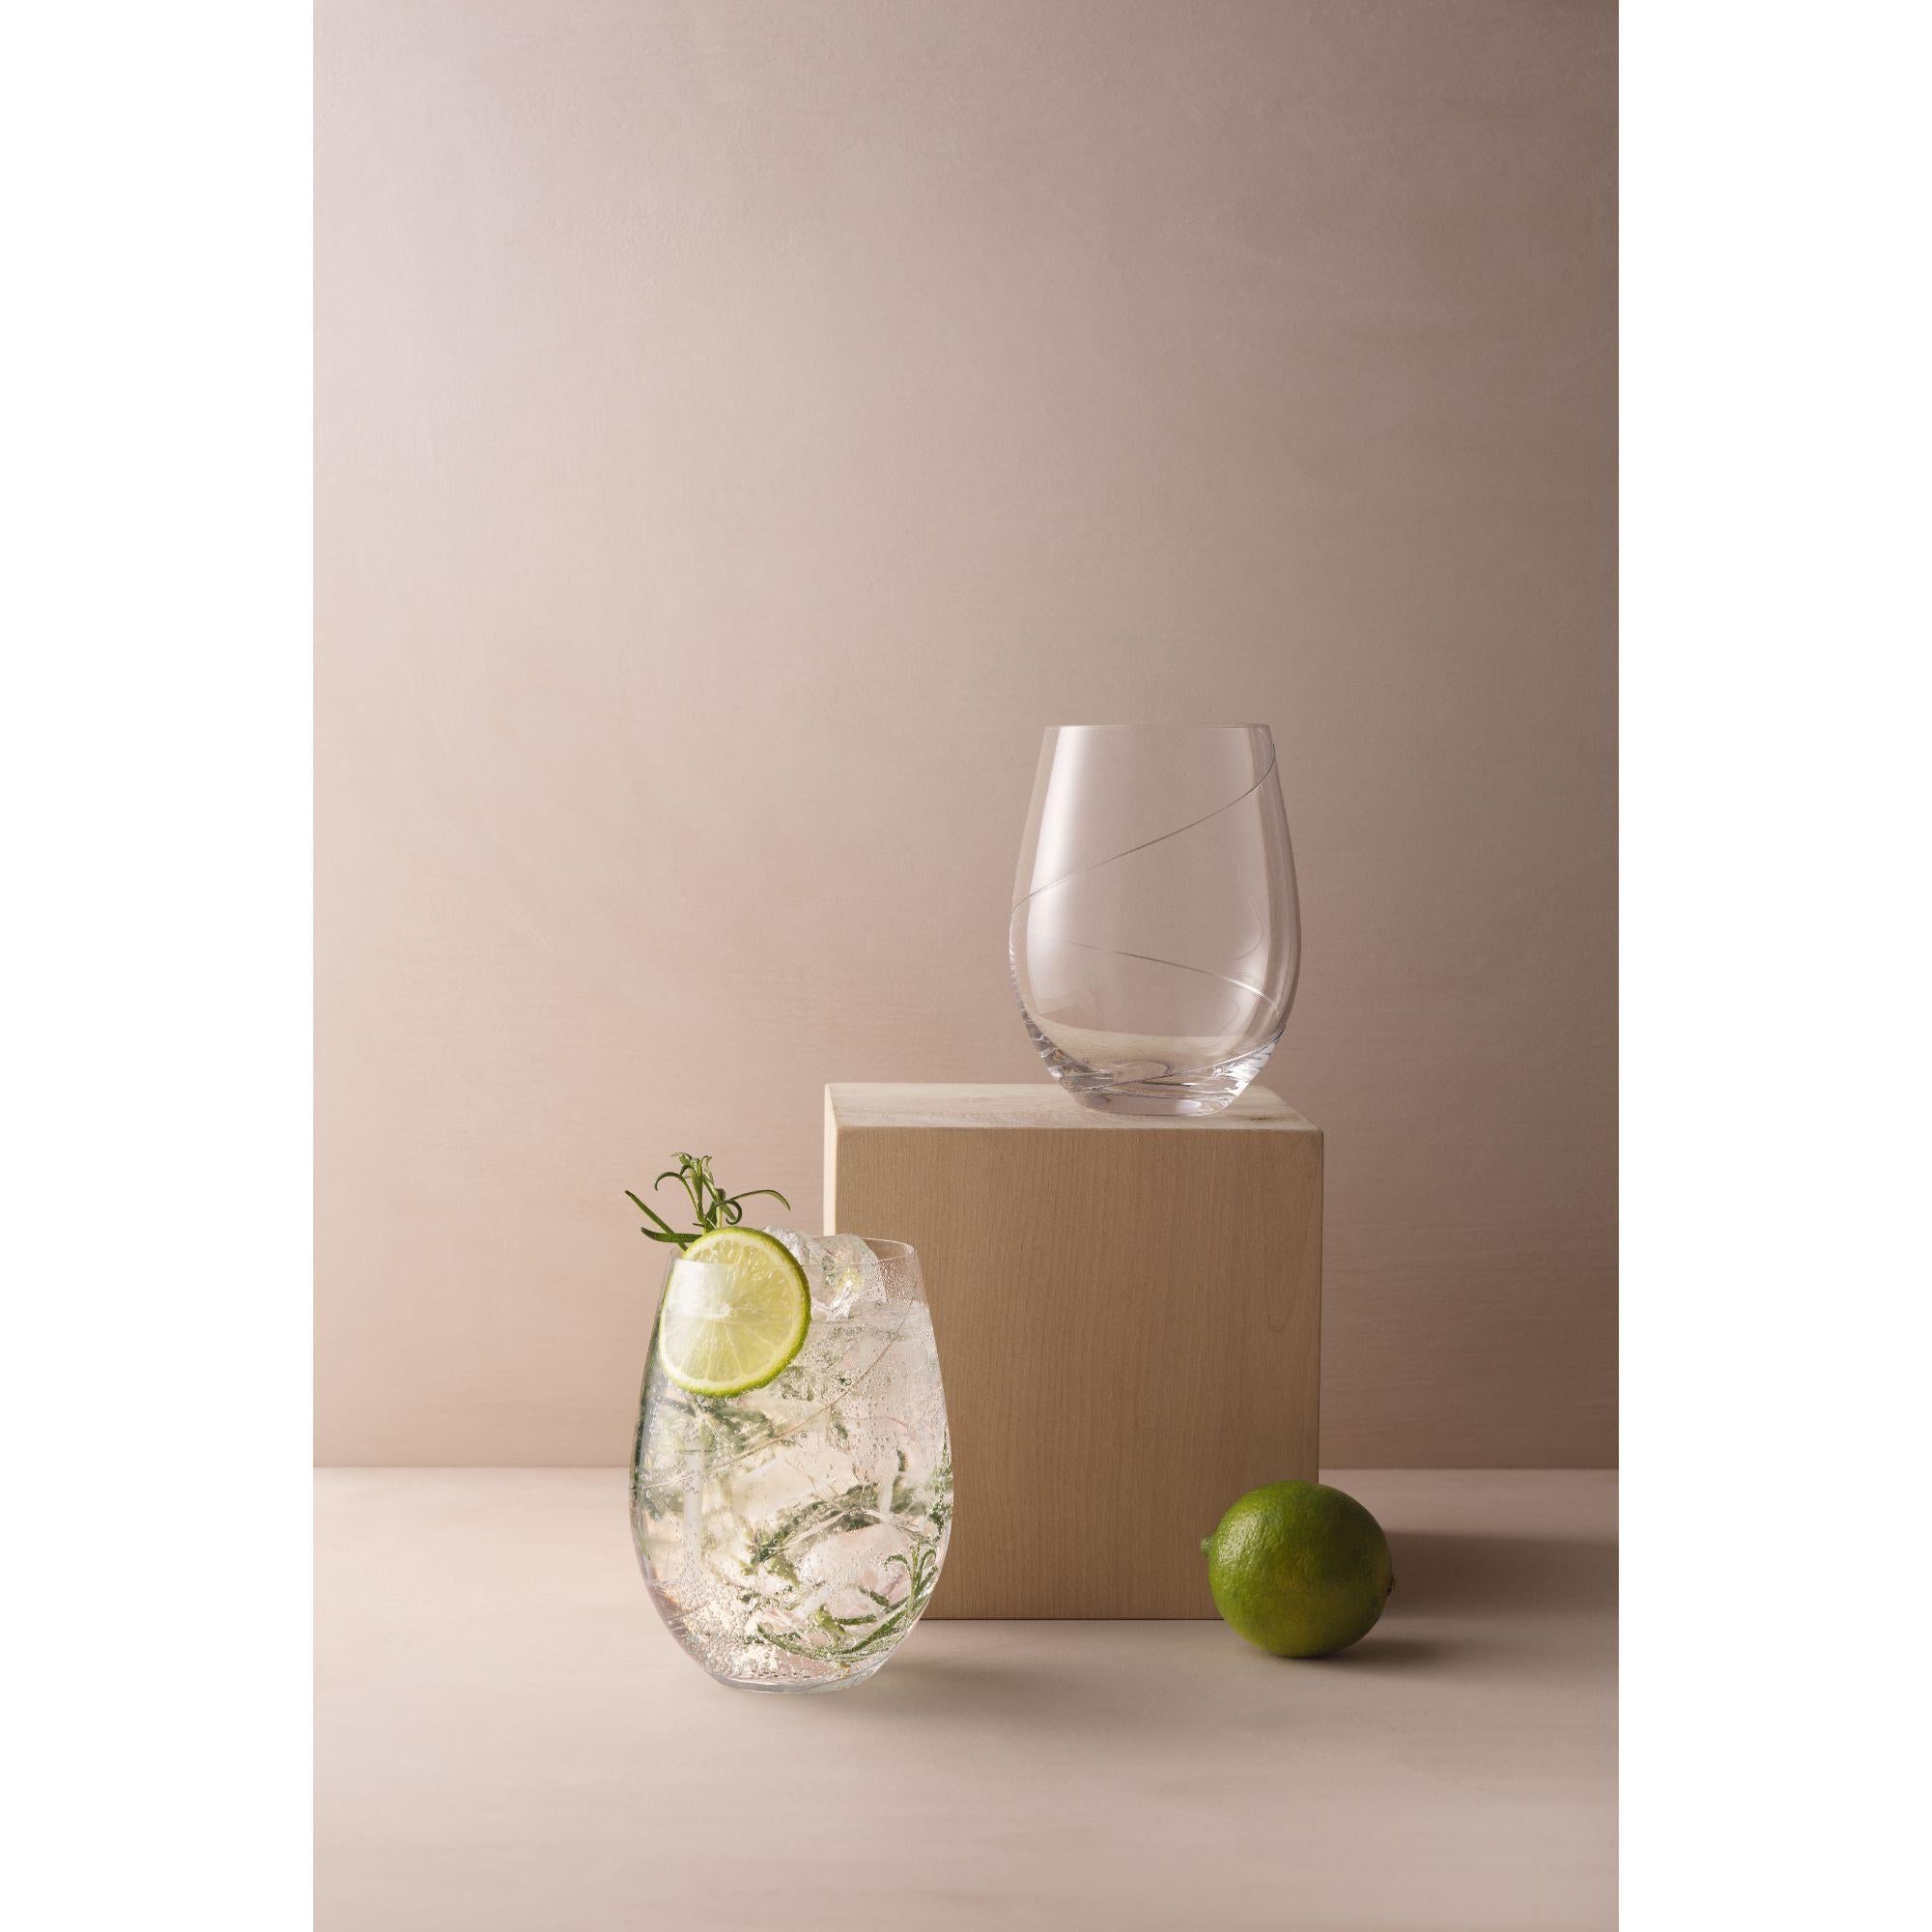 Line from Kosta Boda has been in production since 1982. The collection is unique, with a thread of spun glass applied on each product by hand – a symbol of high-quality Swedish craftsmanship from Kosta Glassworks. The mouth-blown stemless glass is